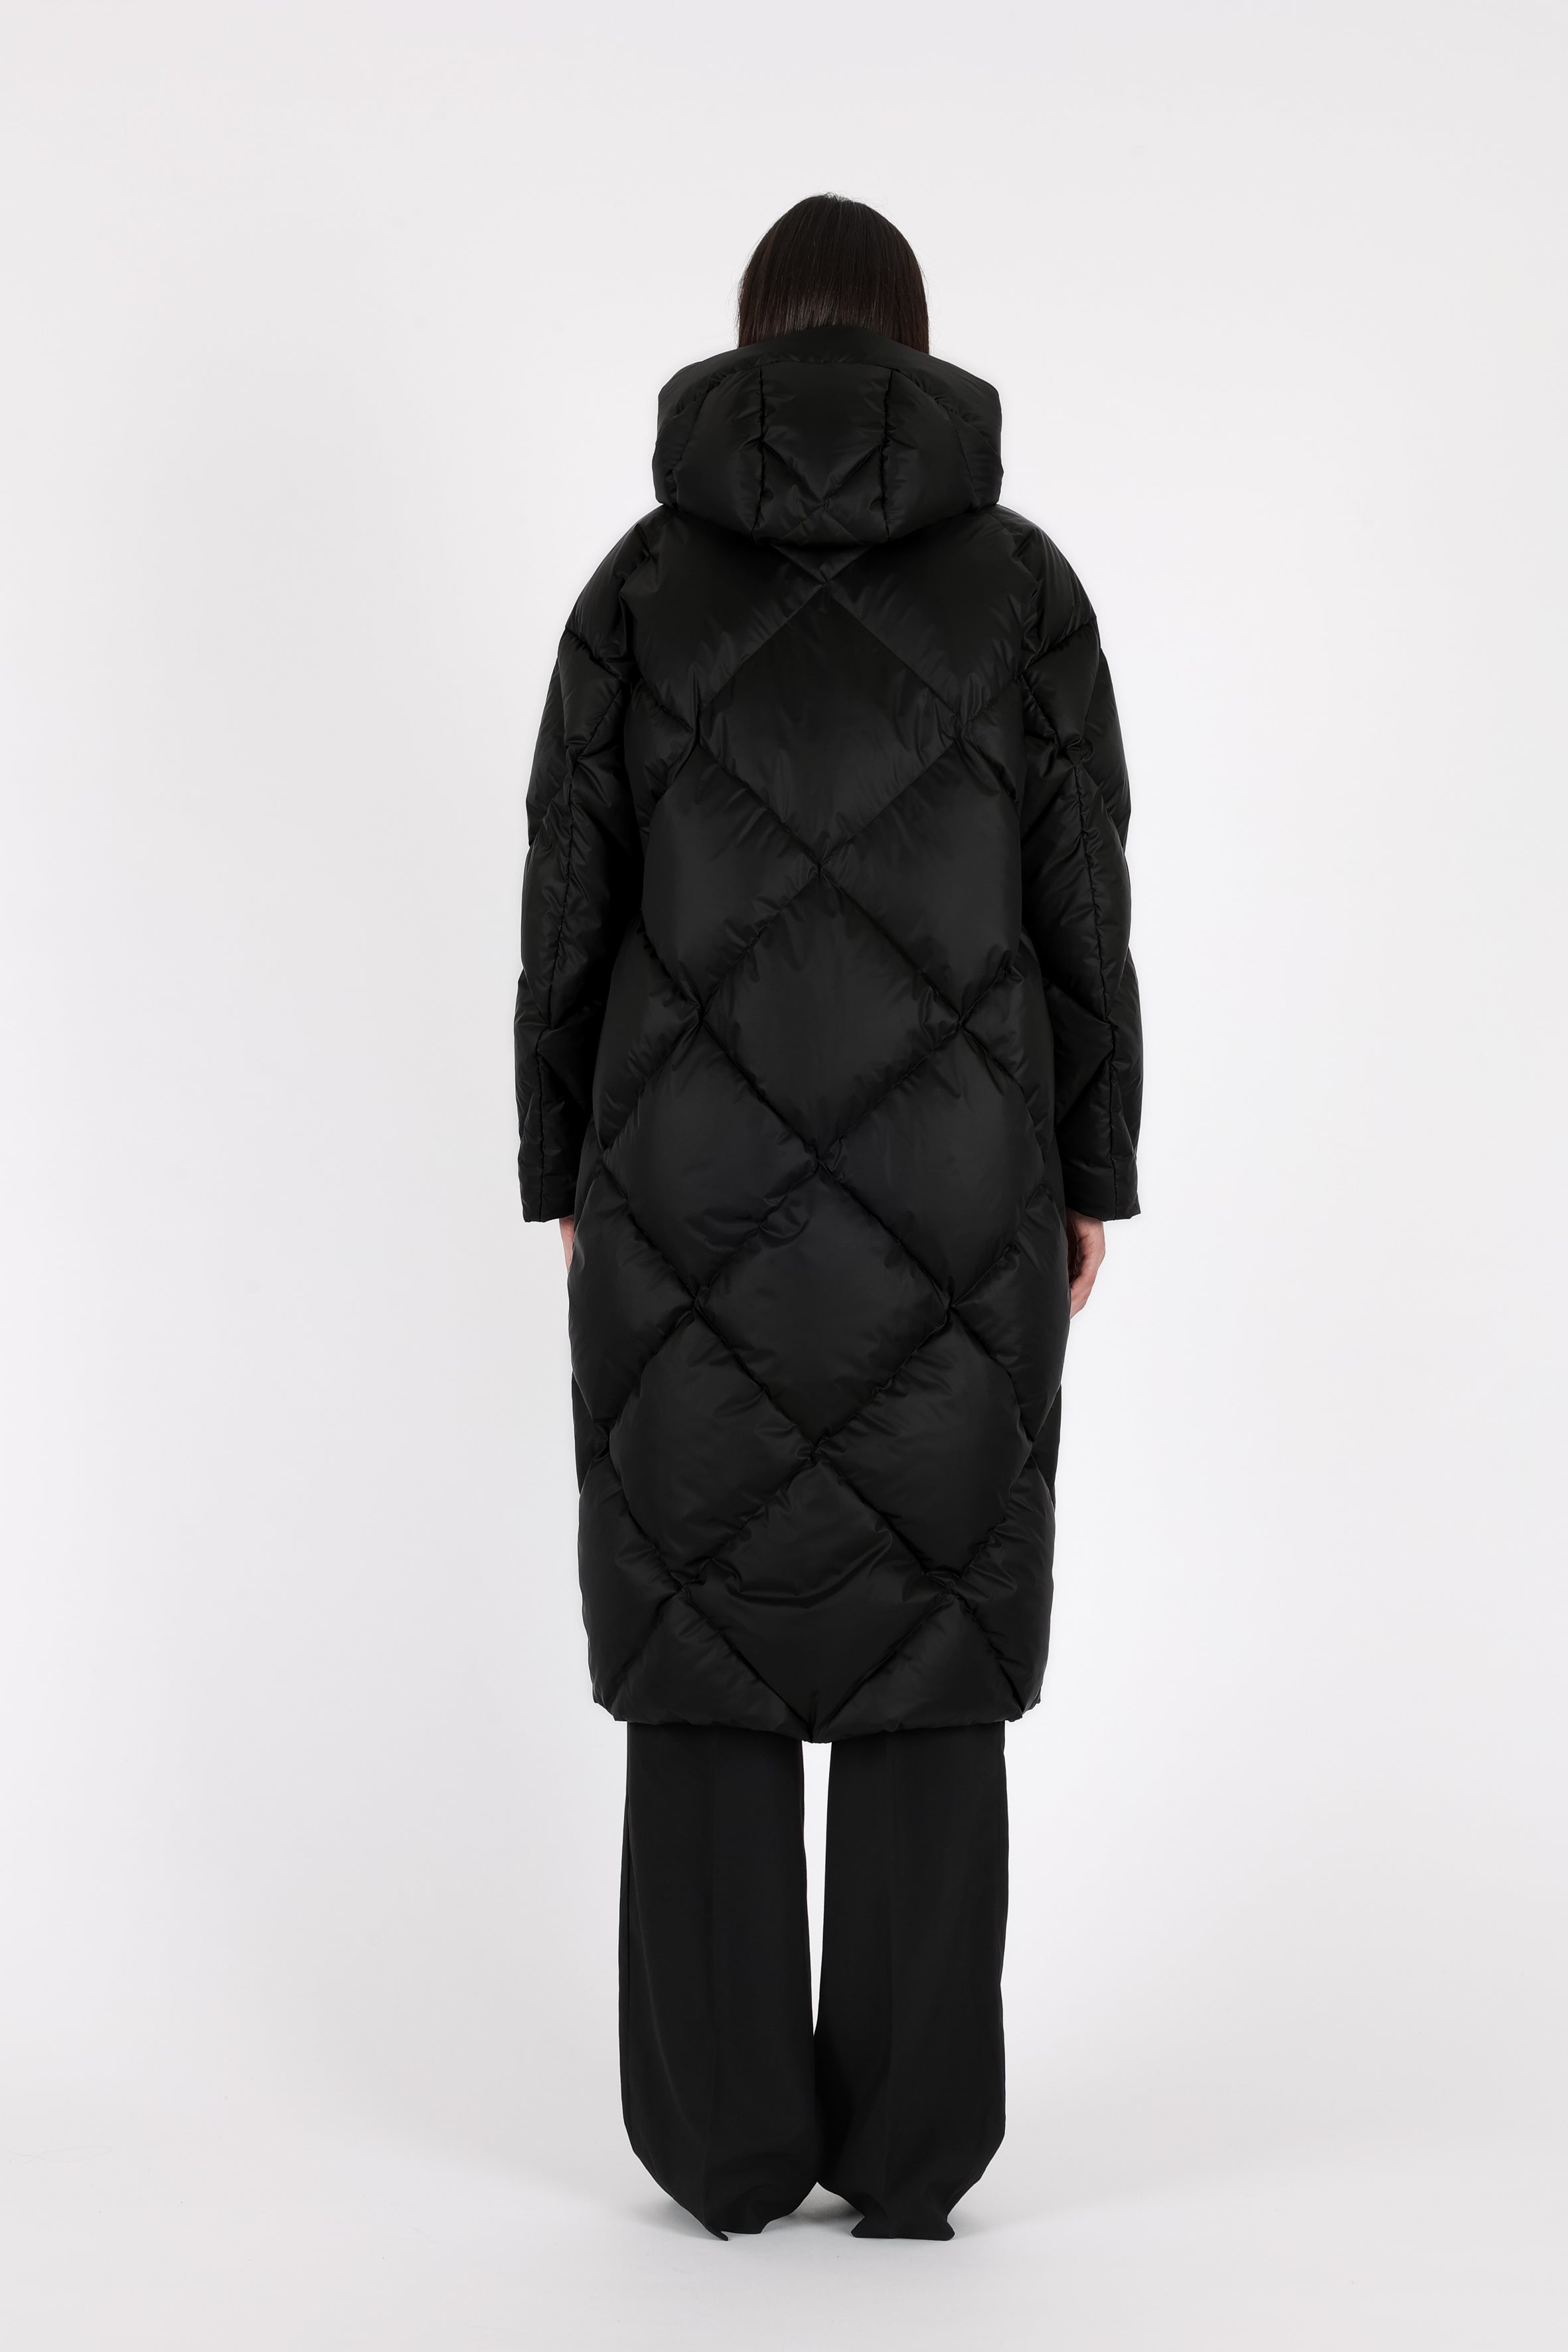 large Diamond Quilted down coat with polished two-way metal zipper